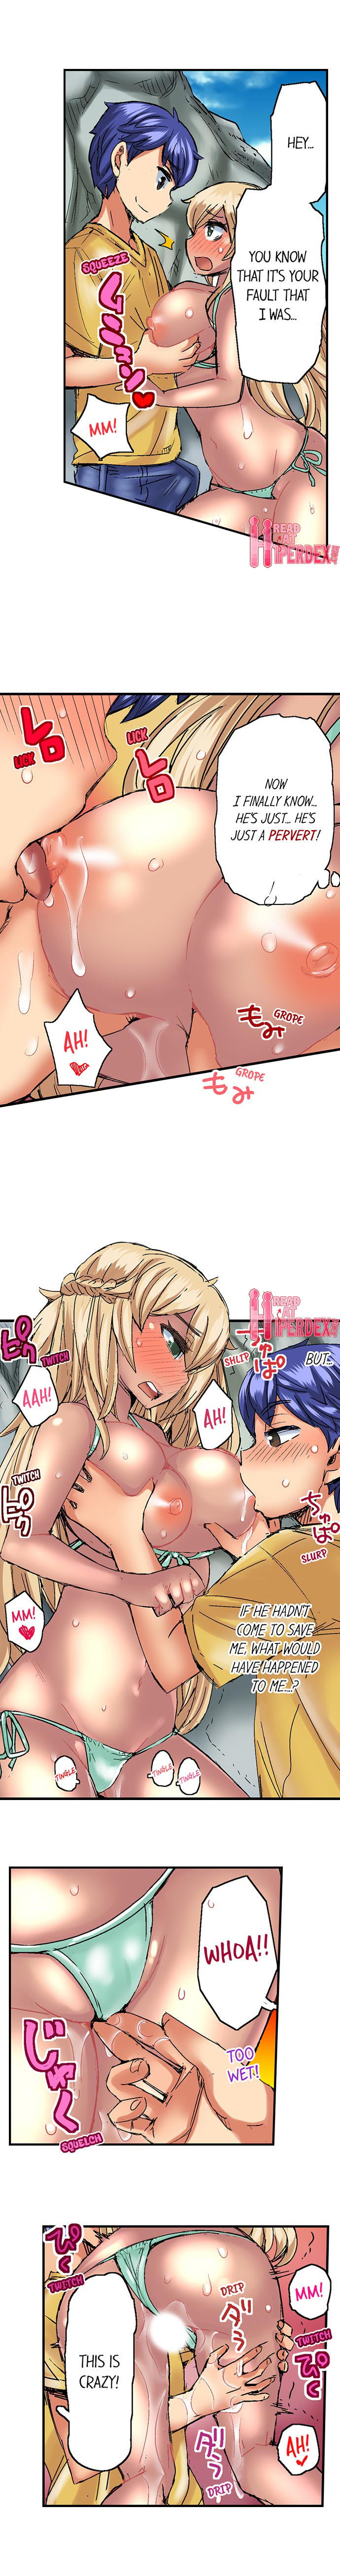 Taking a Hot Tanned Chick’s Virginity - Chapter 18 Page 2